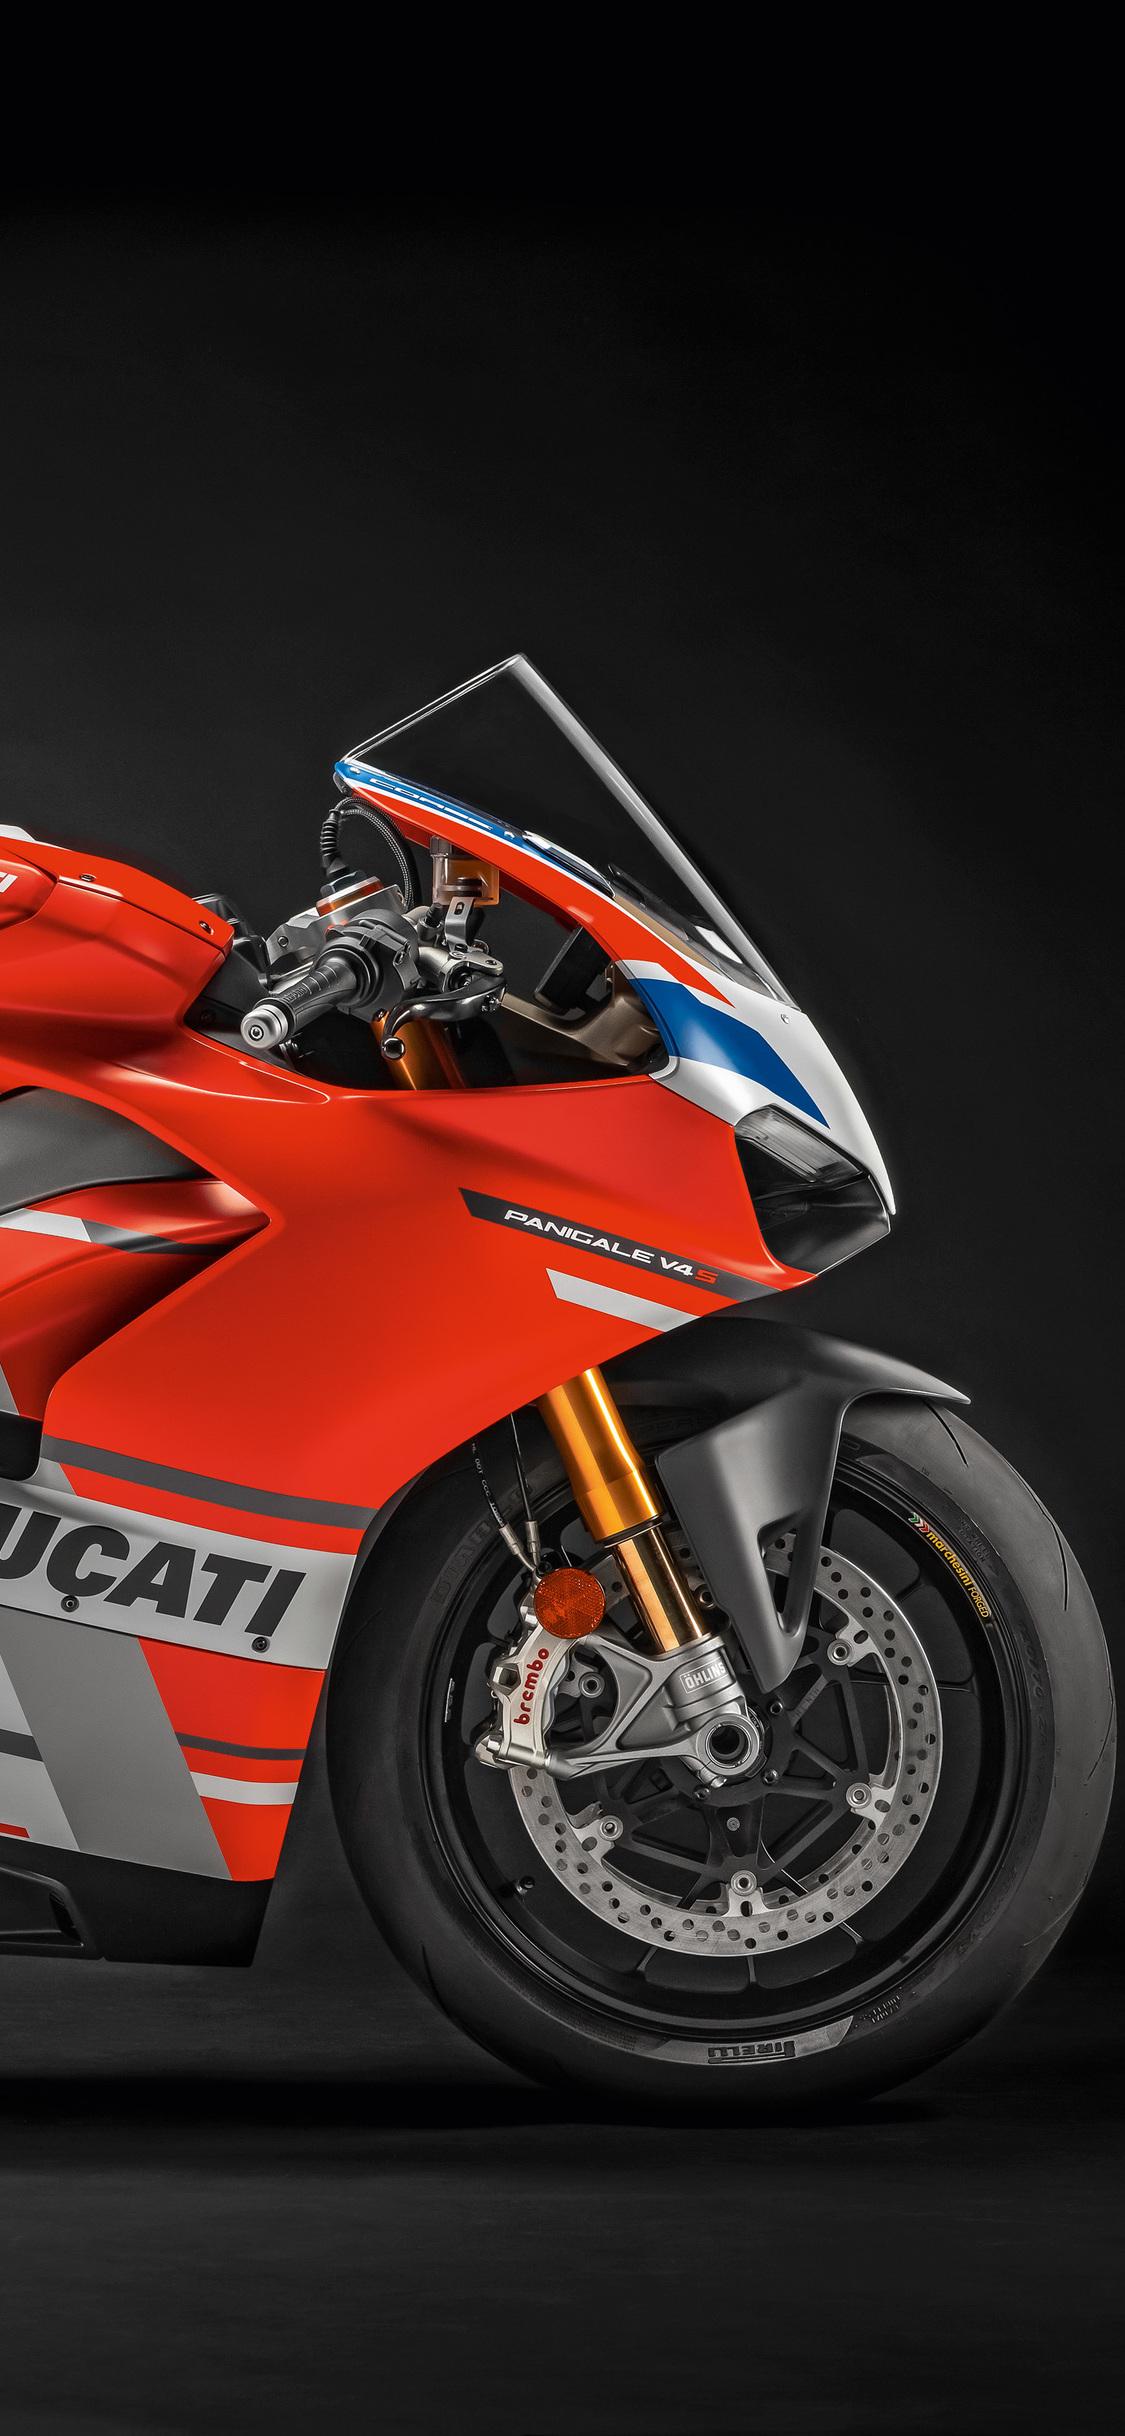 Ducati Panigale V4 S Corse iPhone XS, iPhone